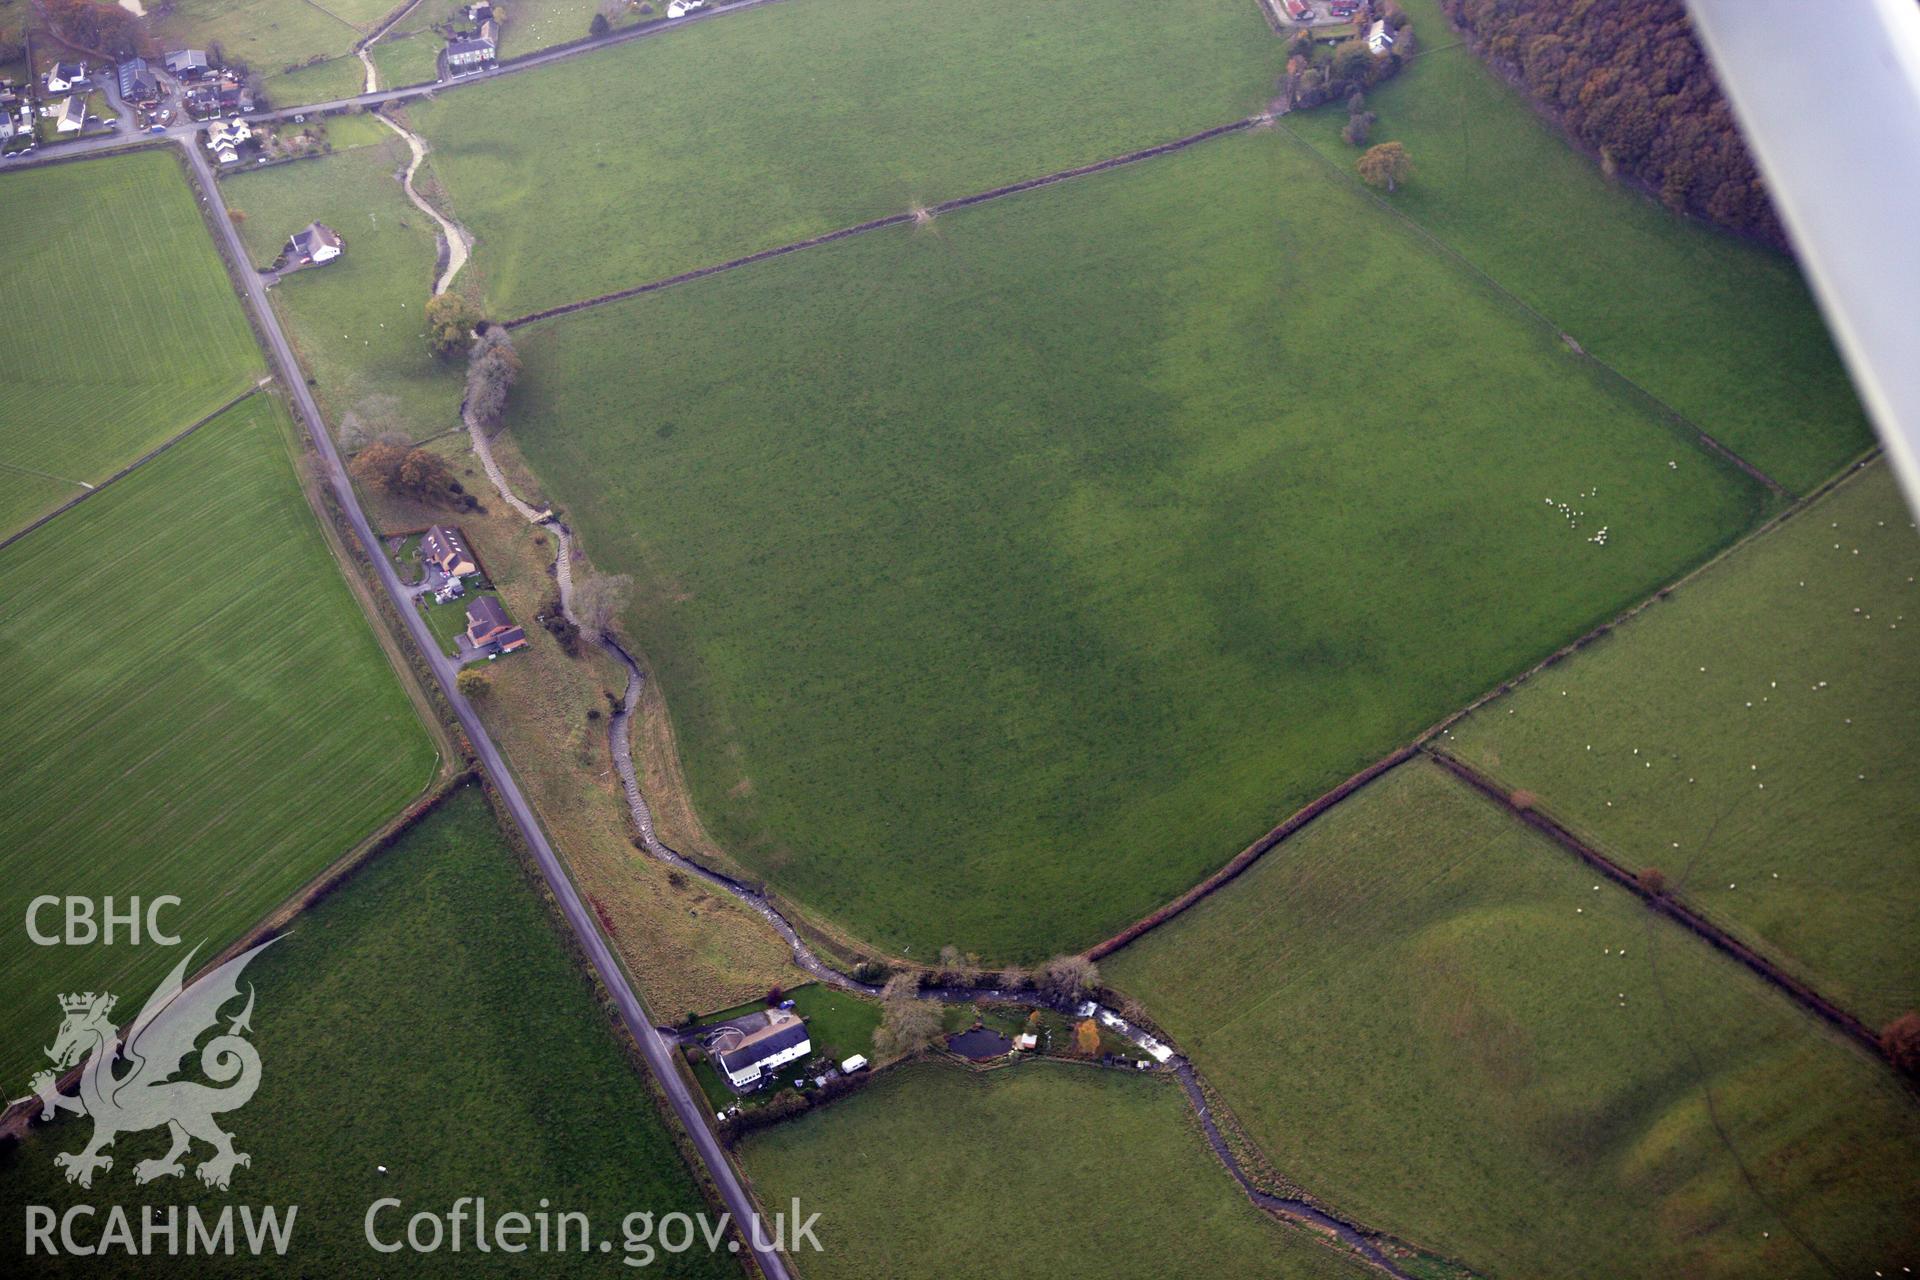 RCAHMW colour oblique aerial photograph of the possible Roman Villa site at Nant Magwr, Abermagwr. Taken on 09 November 2009 by Toby Driver